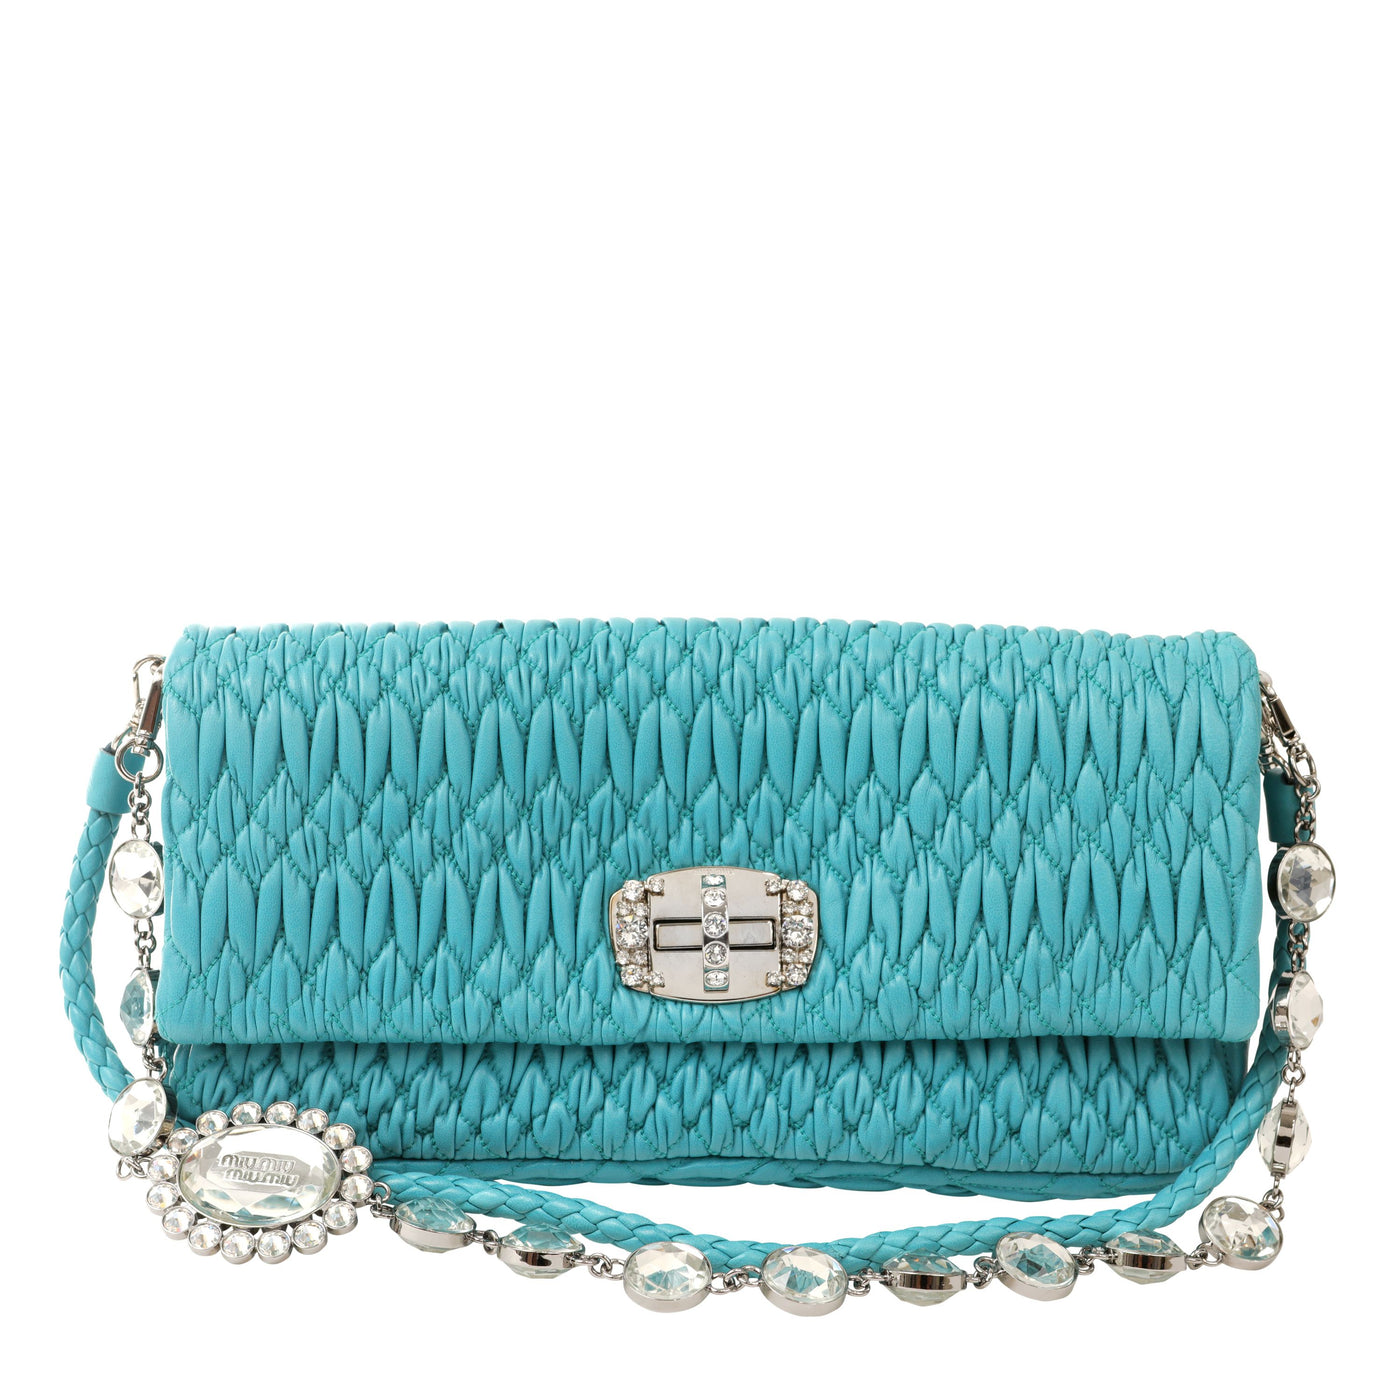 Miu Miu Turquoise Iconic Crystal Cloquè Small Shoulder Bag with Silver Hardware